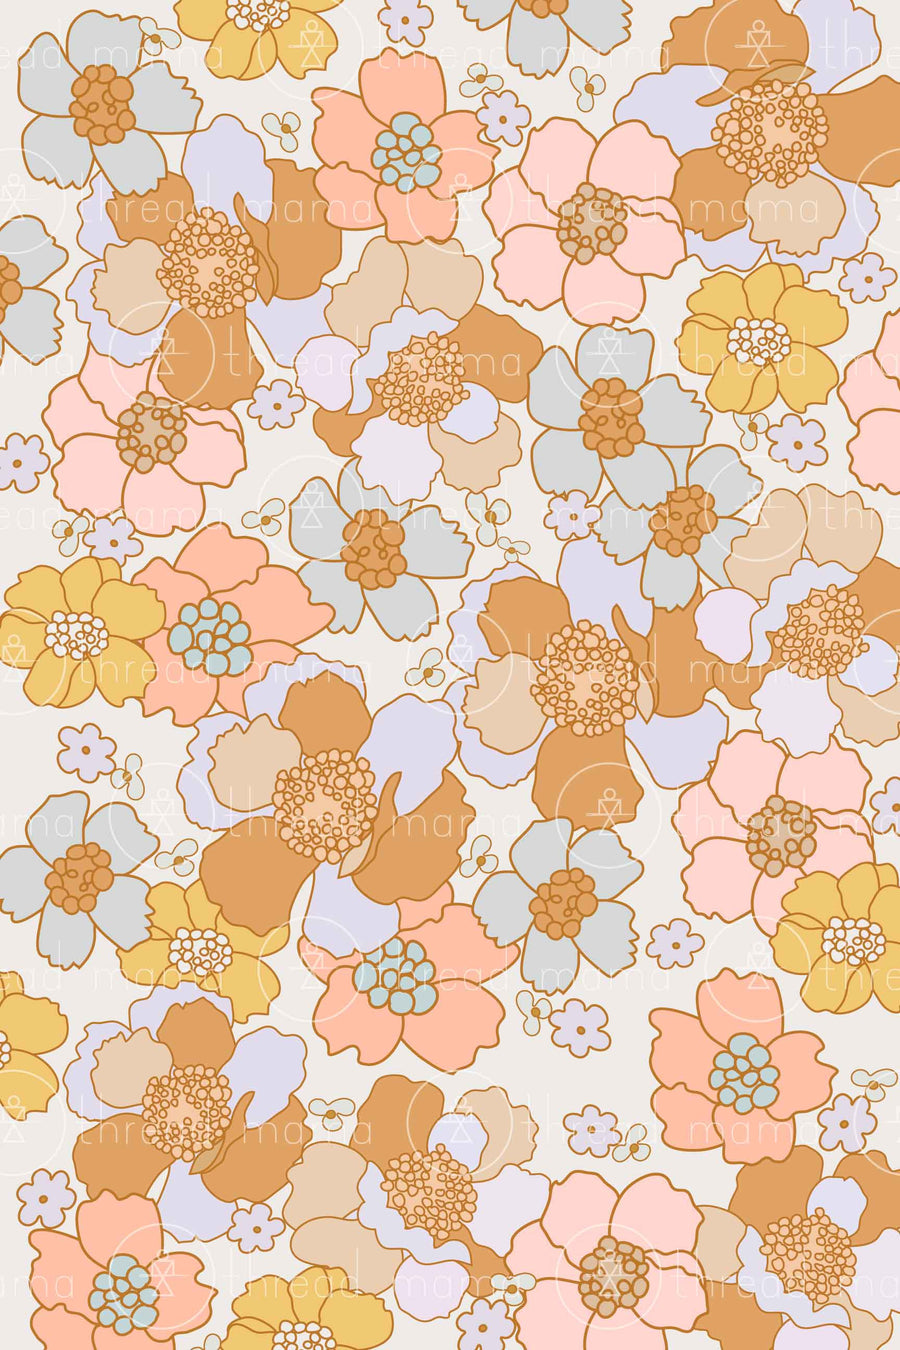 Repeating Pattern #8 (Seamless)